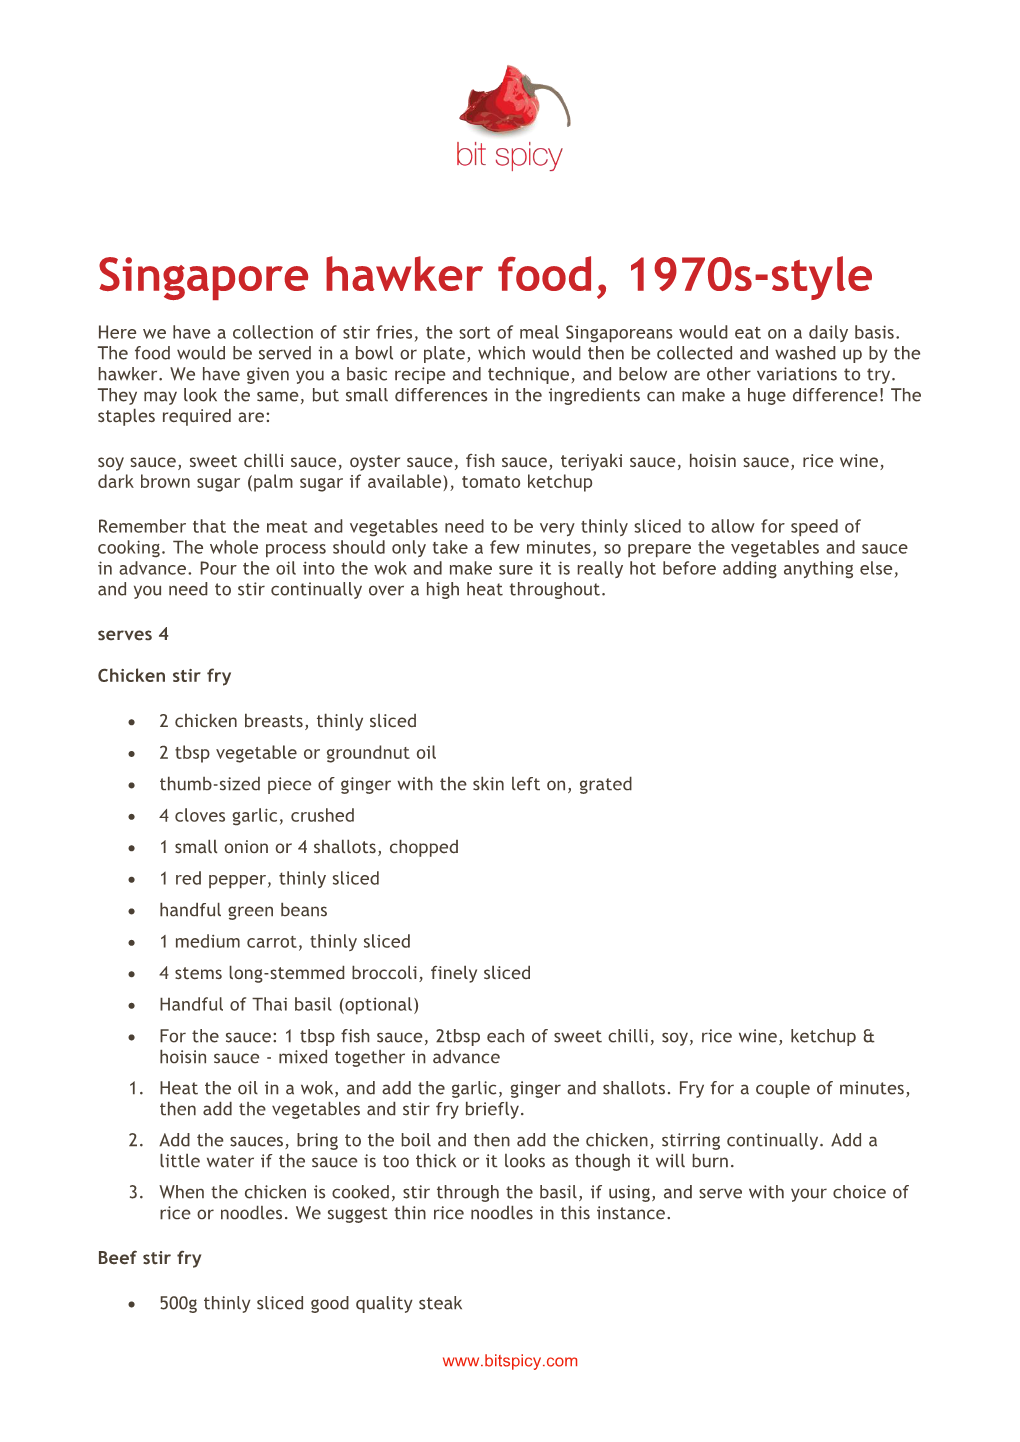 Singapore Hawker Food, 1970S-Style